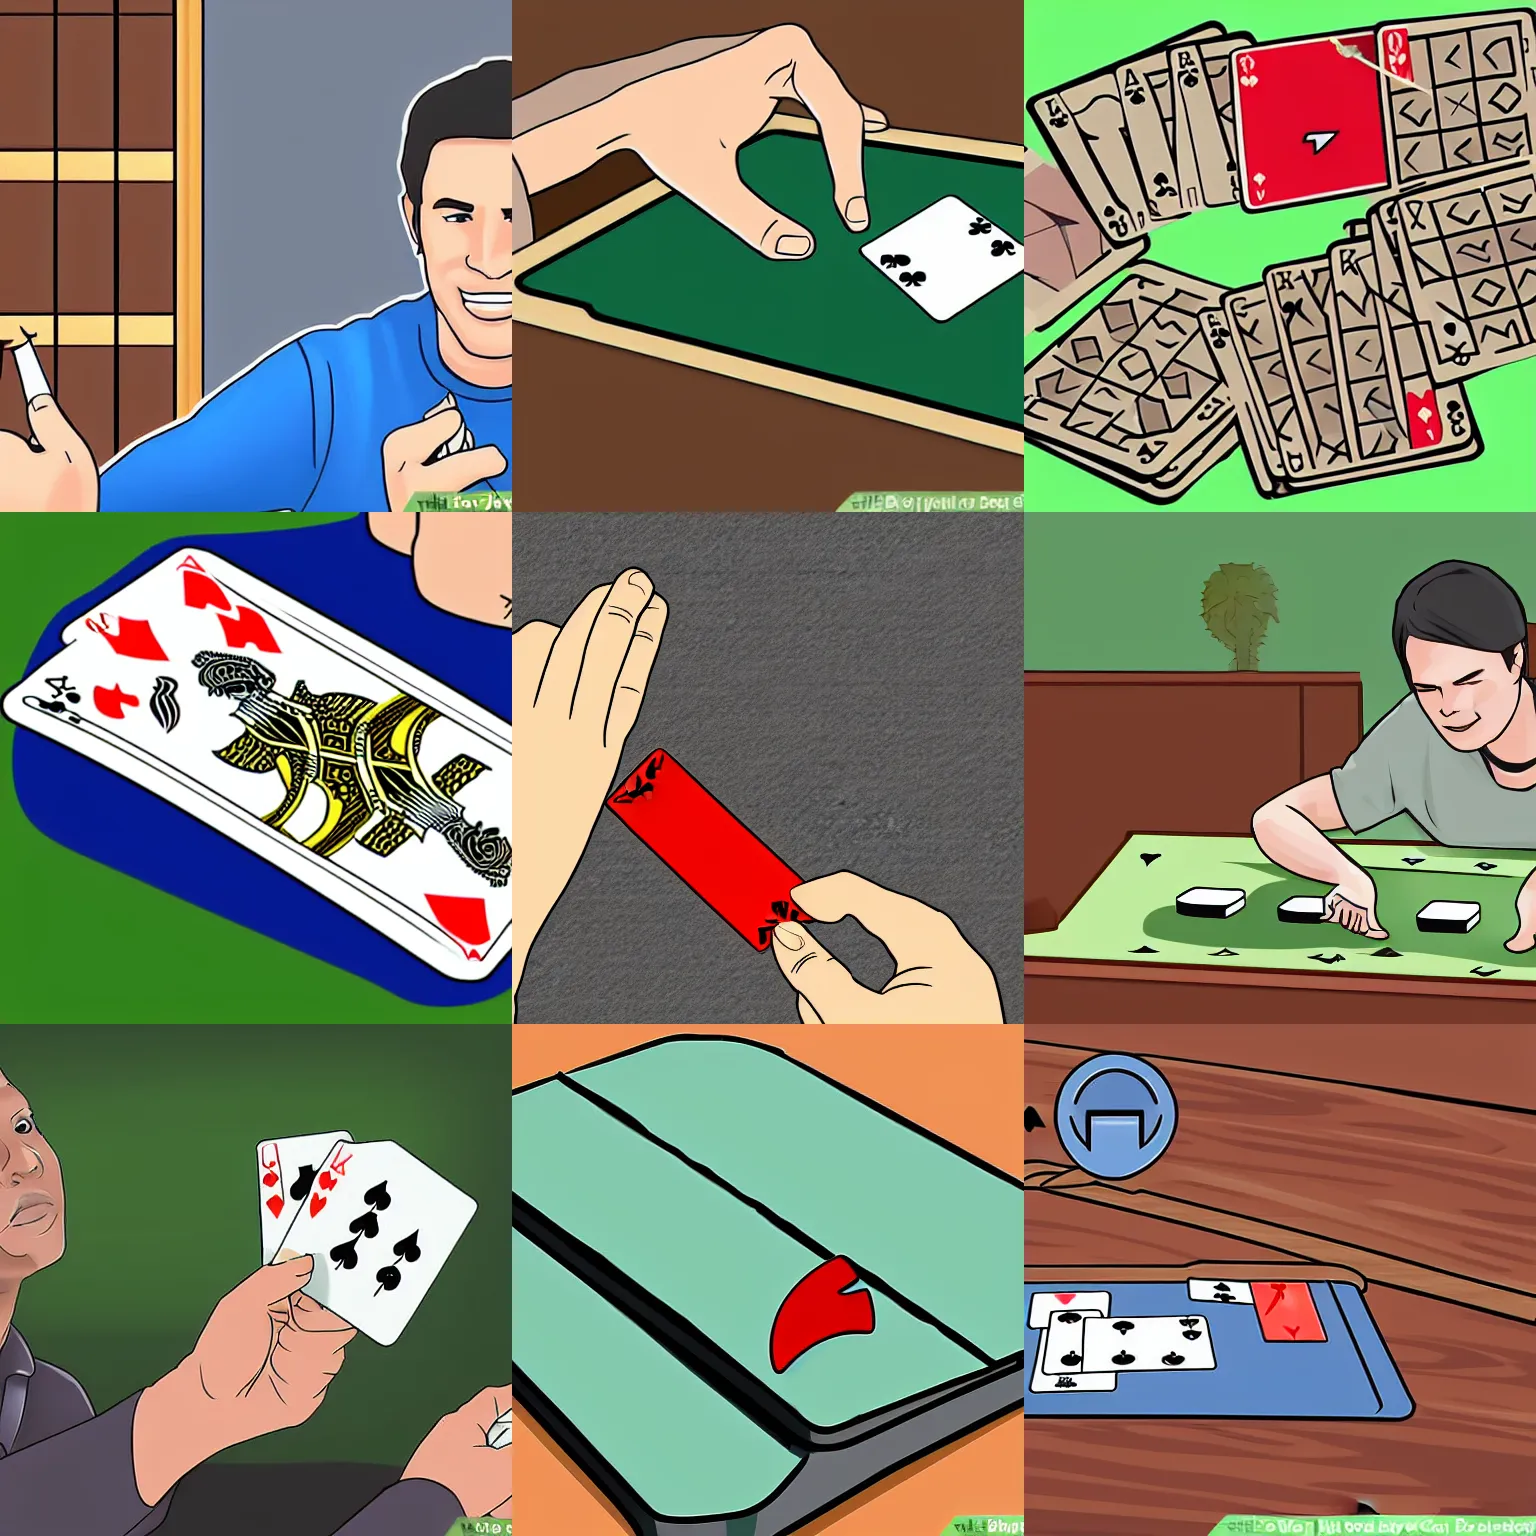 4 Ways to Play Solitaire - wikiHow